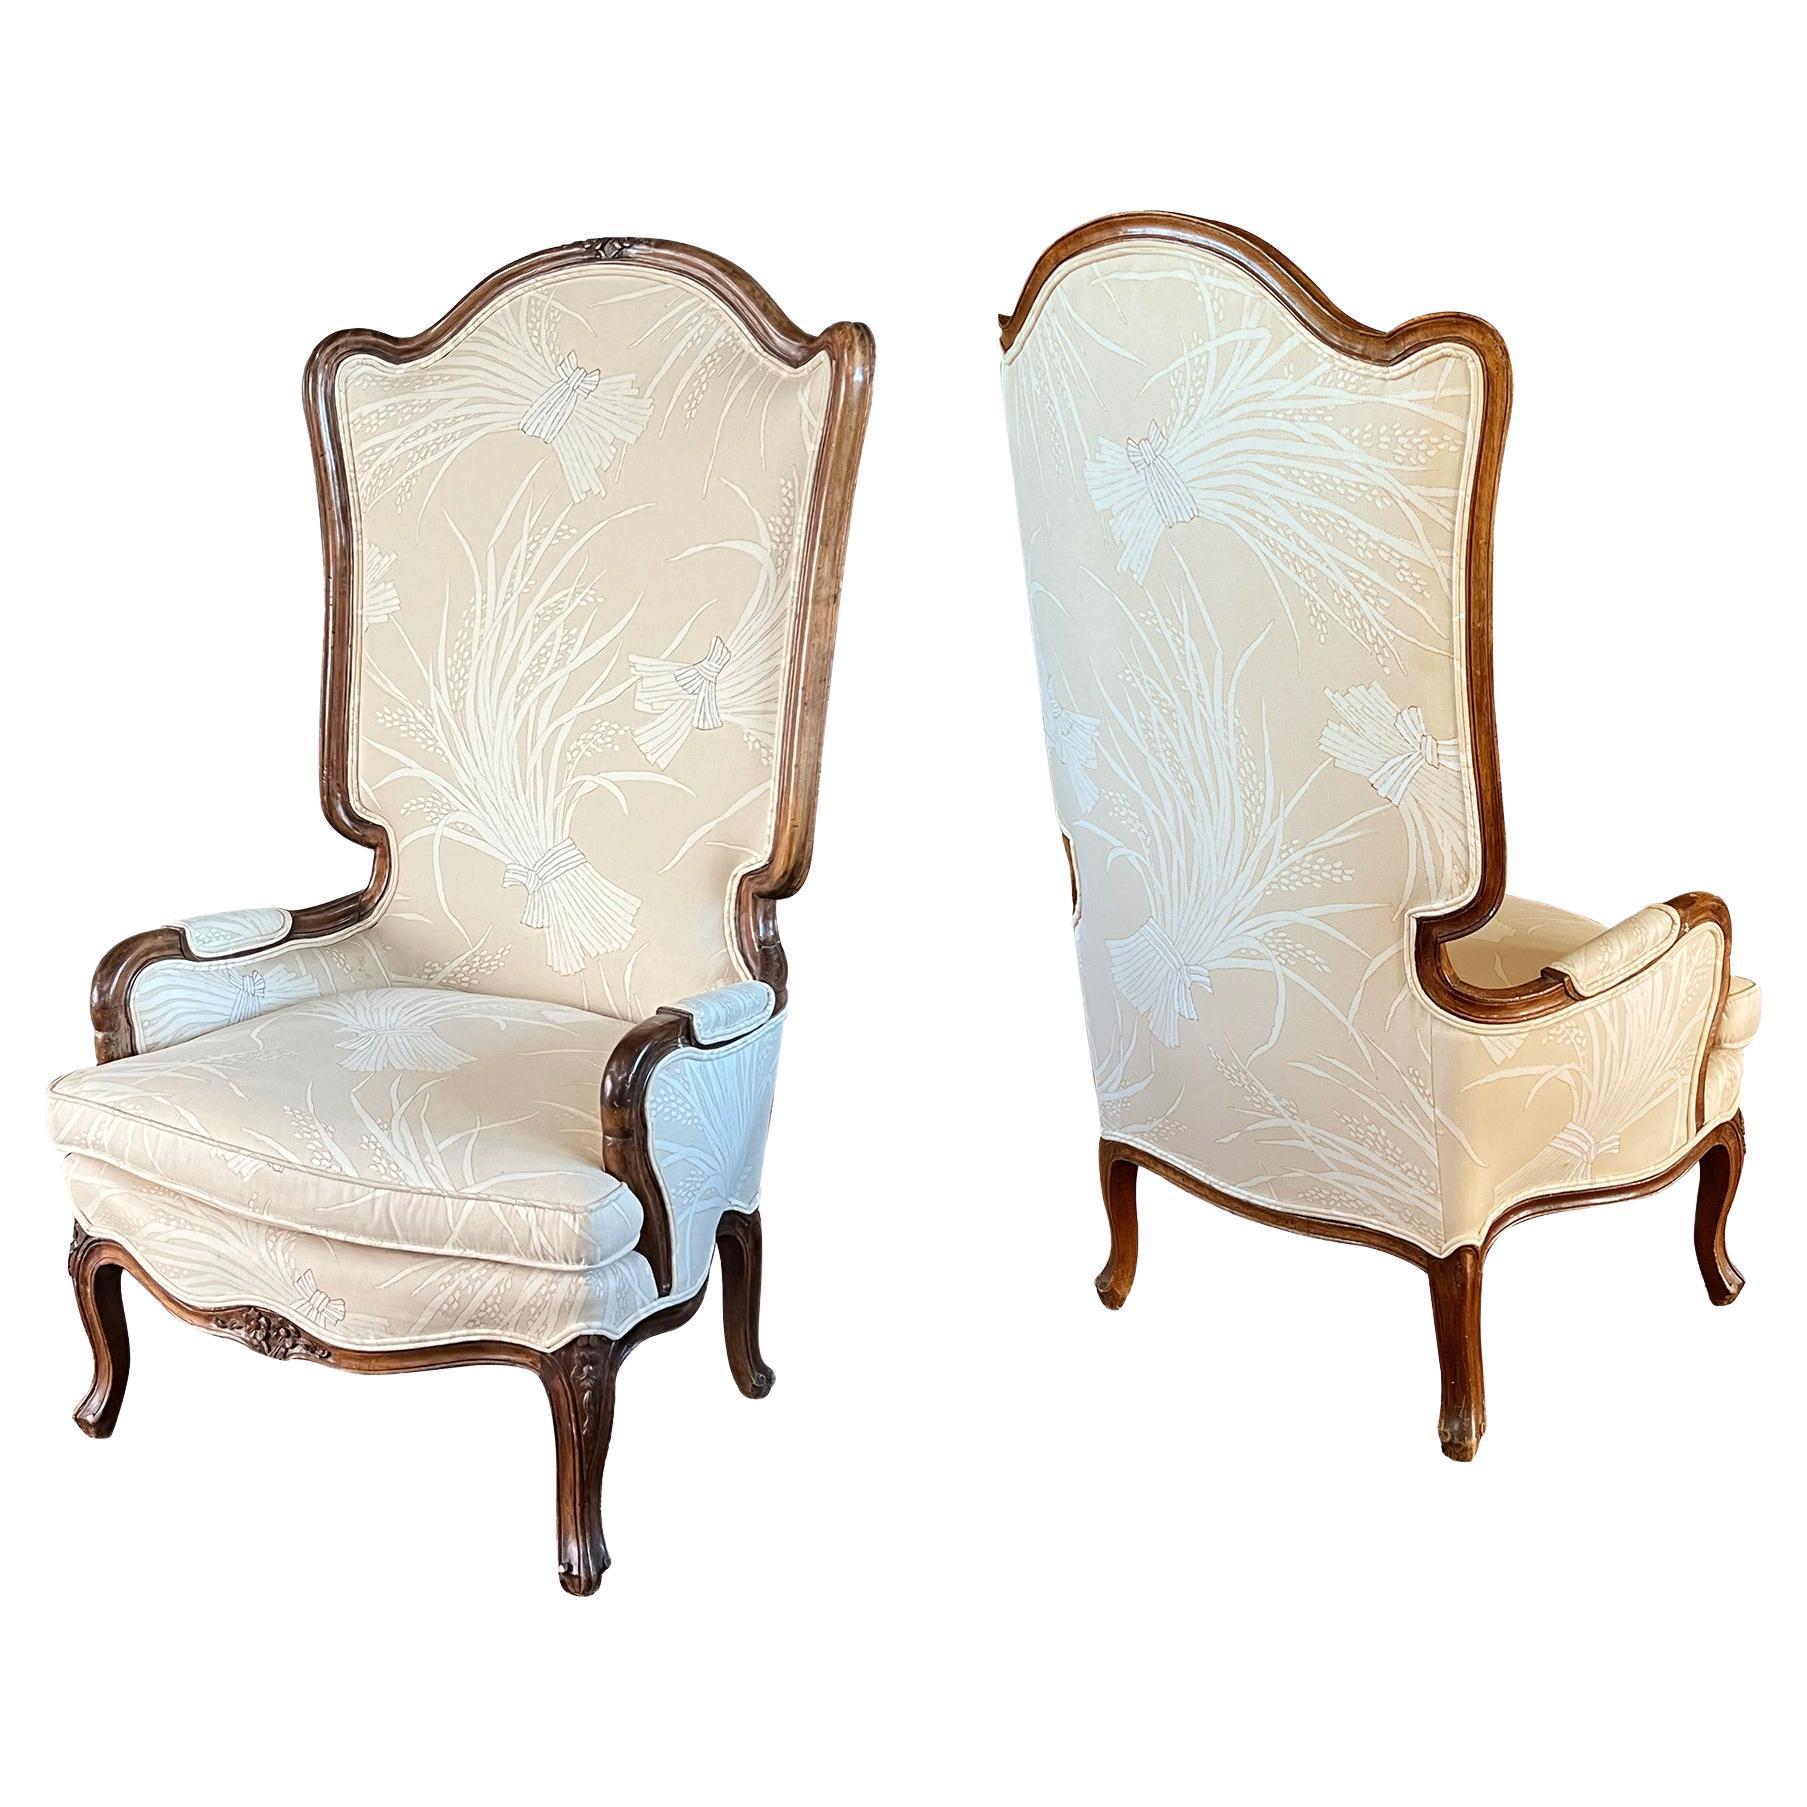 A Stylish Pair of French Louis XV Style High-back Fireside Bergeres 